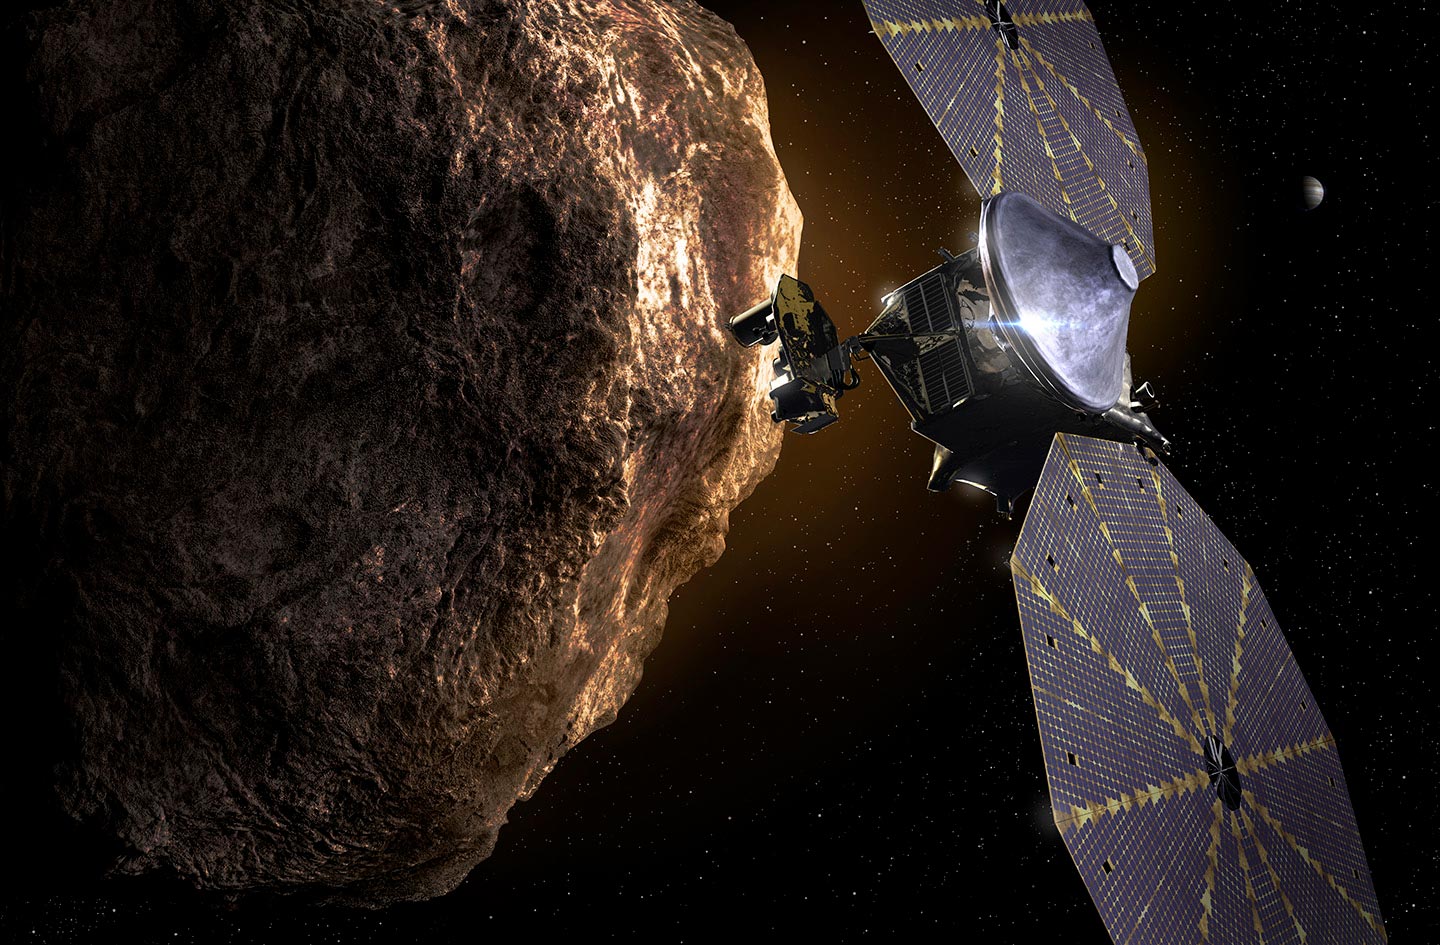 Lucy spacecraft on the Trojan asteroid